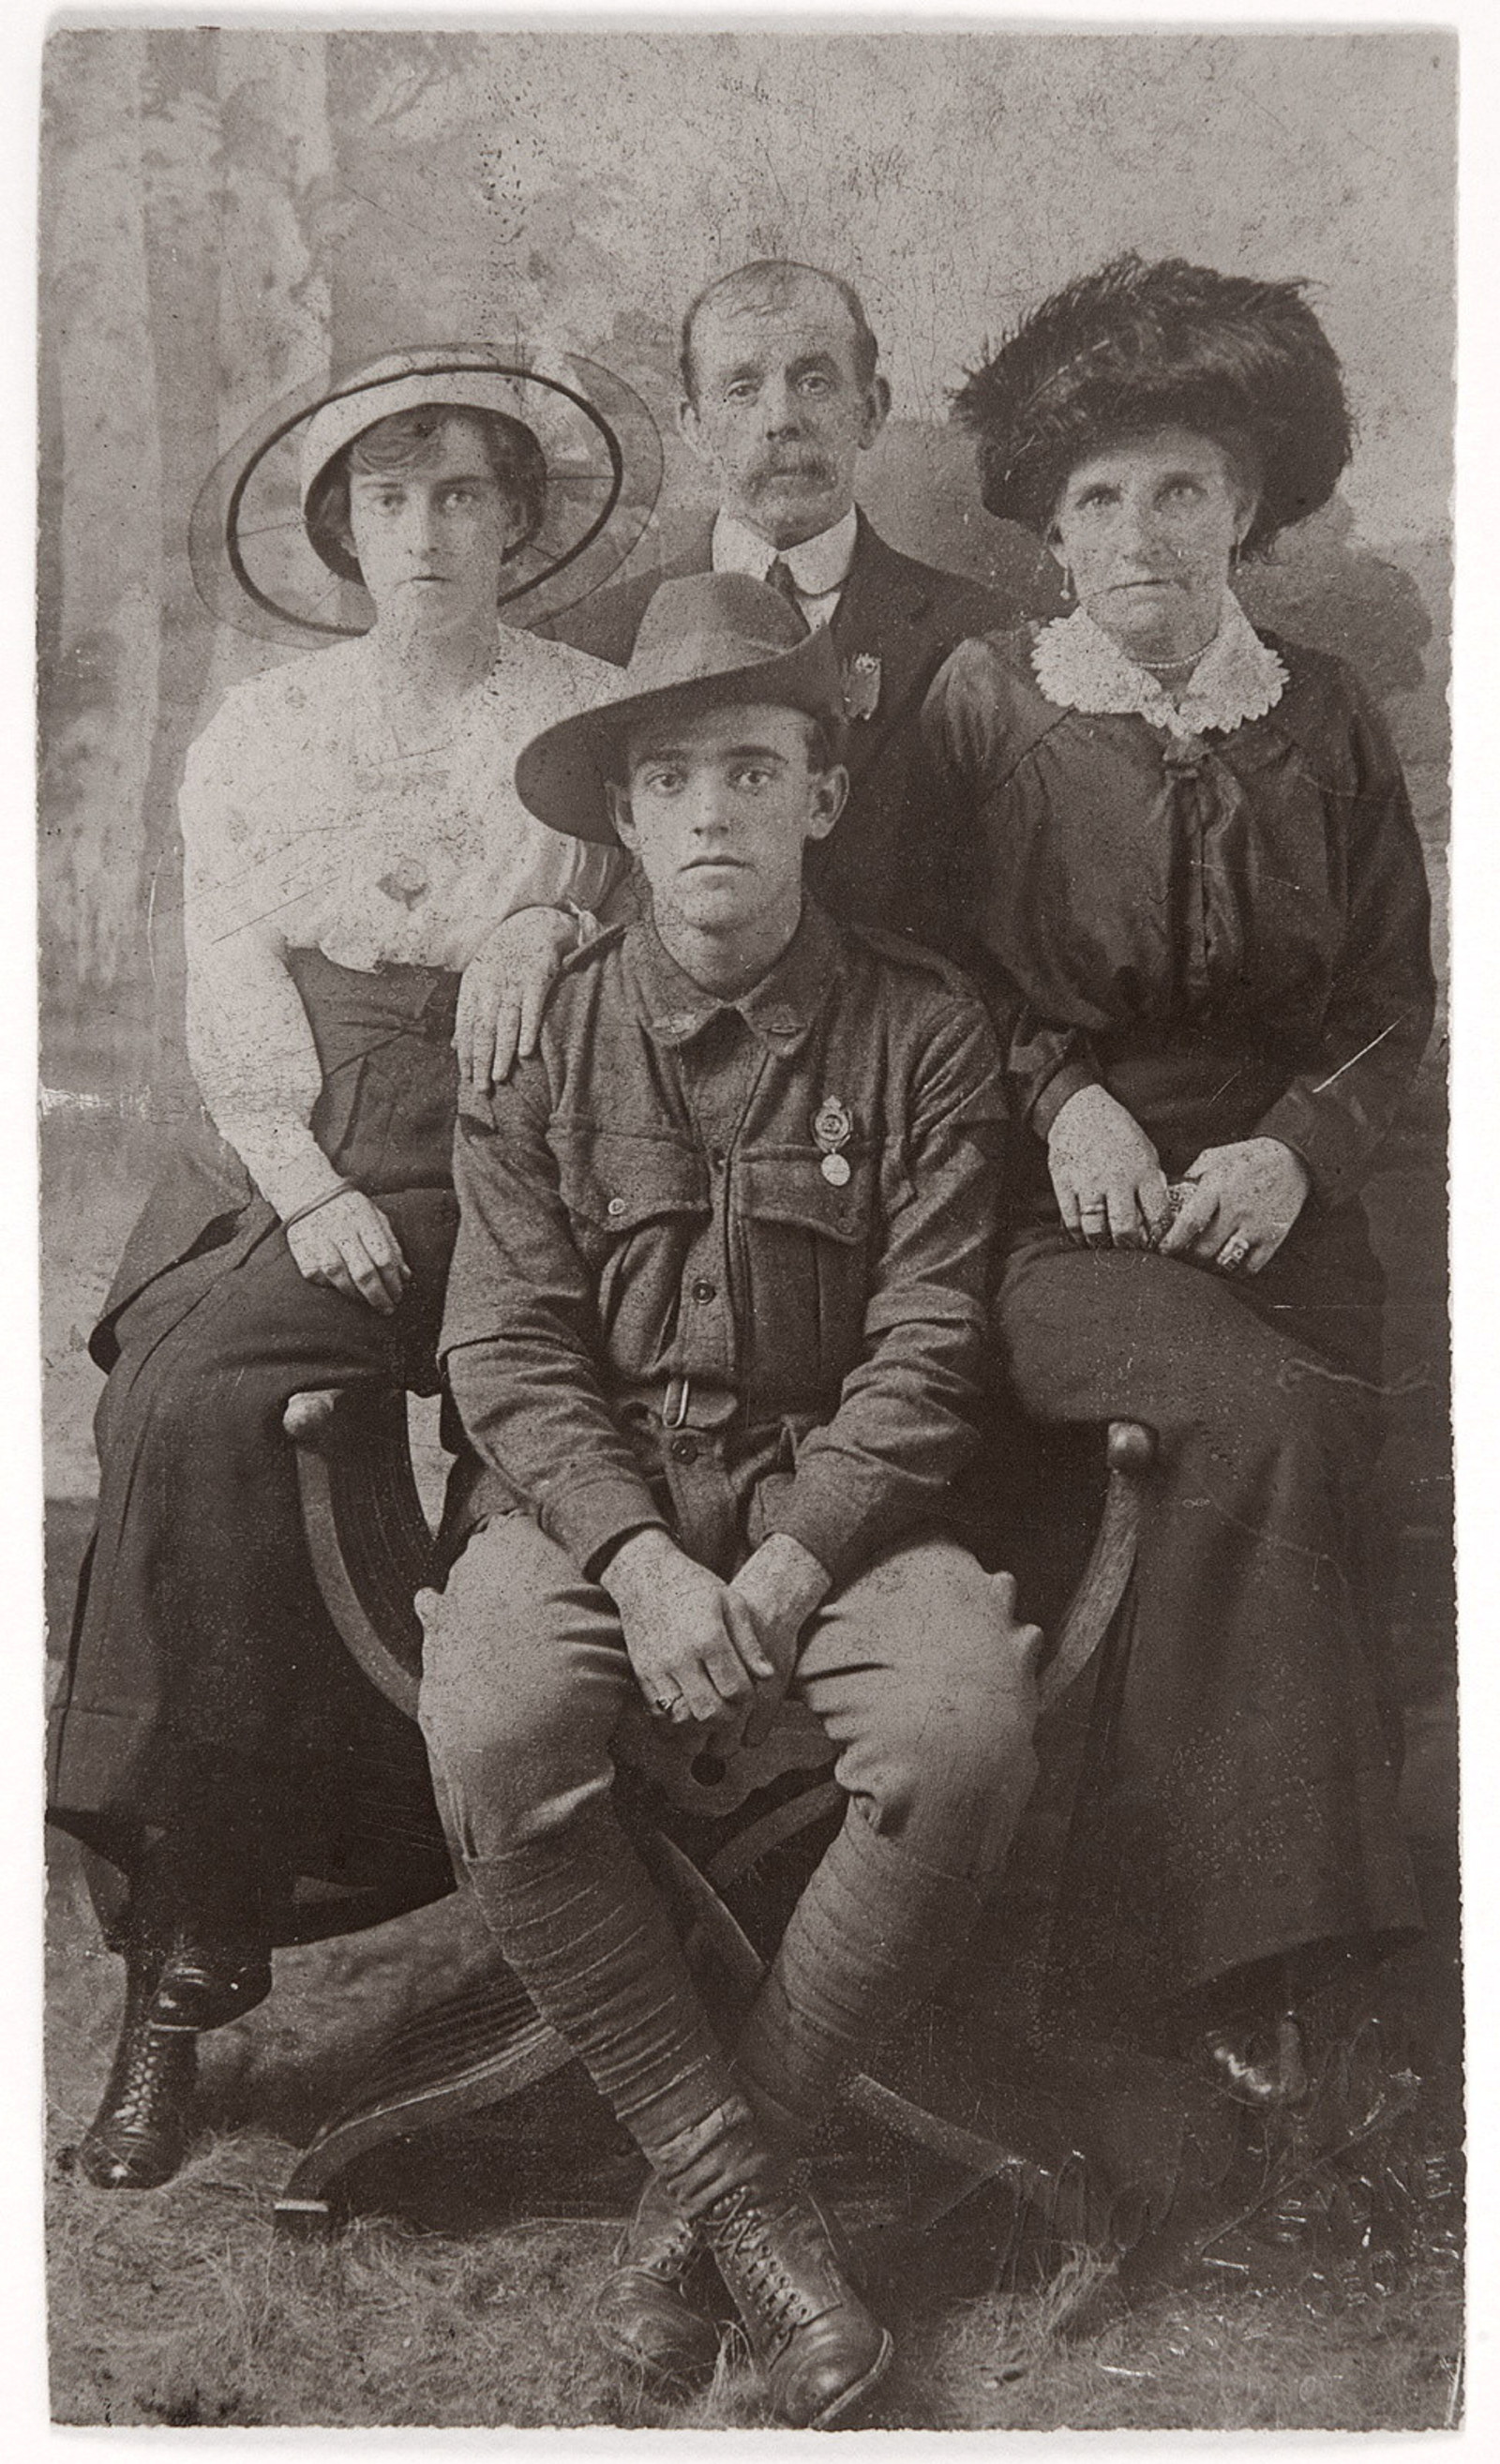 Ada and John Gallagher with their son Fred and daughter Girlie, probably around November 1916